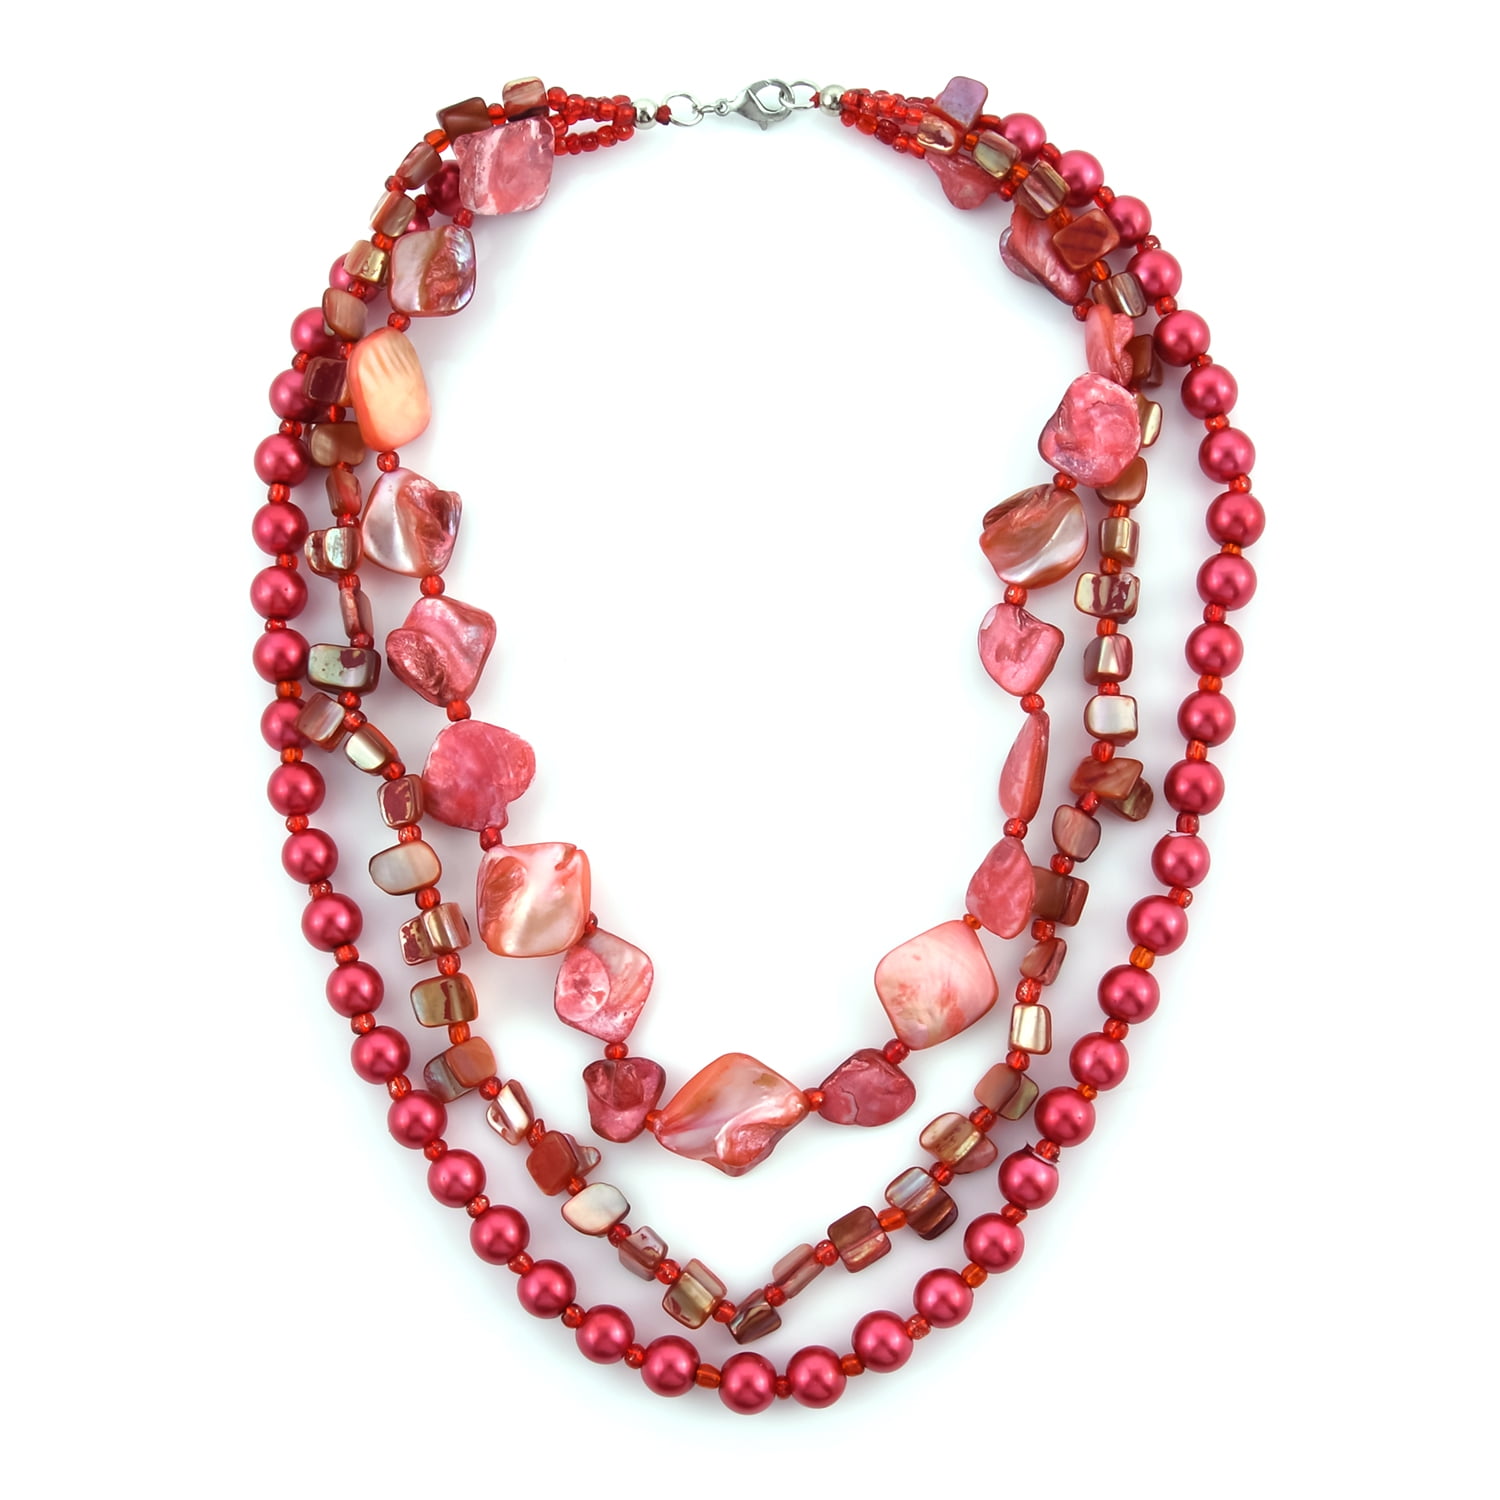 10mm Coral Red South Sea Shell Pearl Round Gemstone Necklace 18"AAA